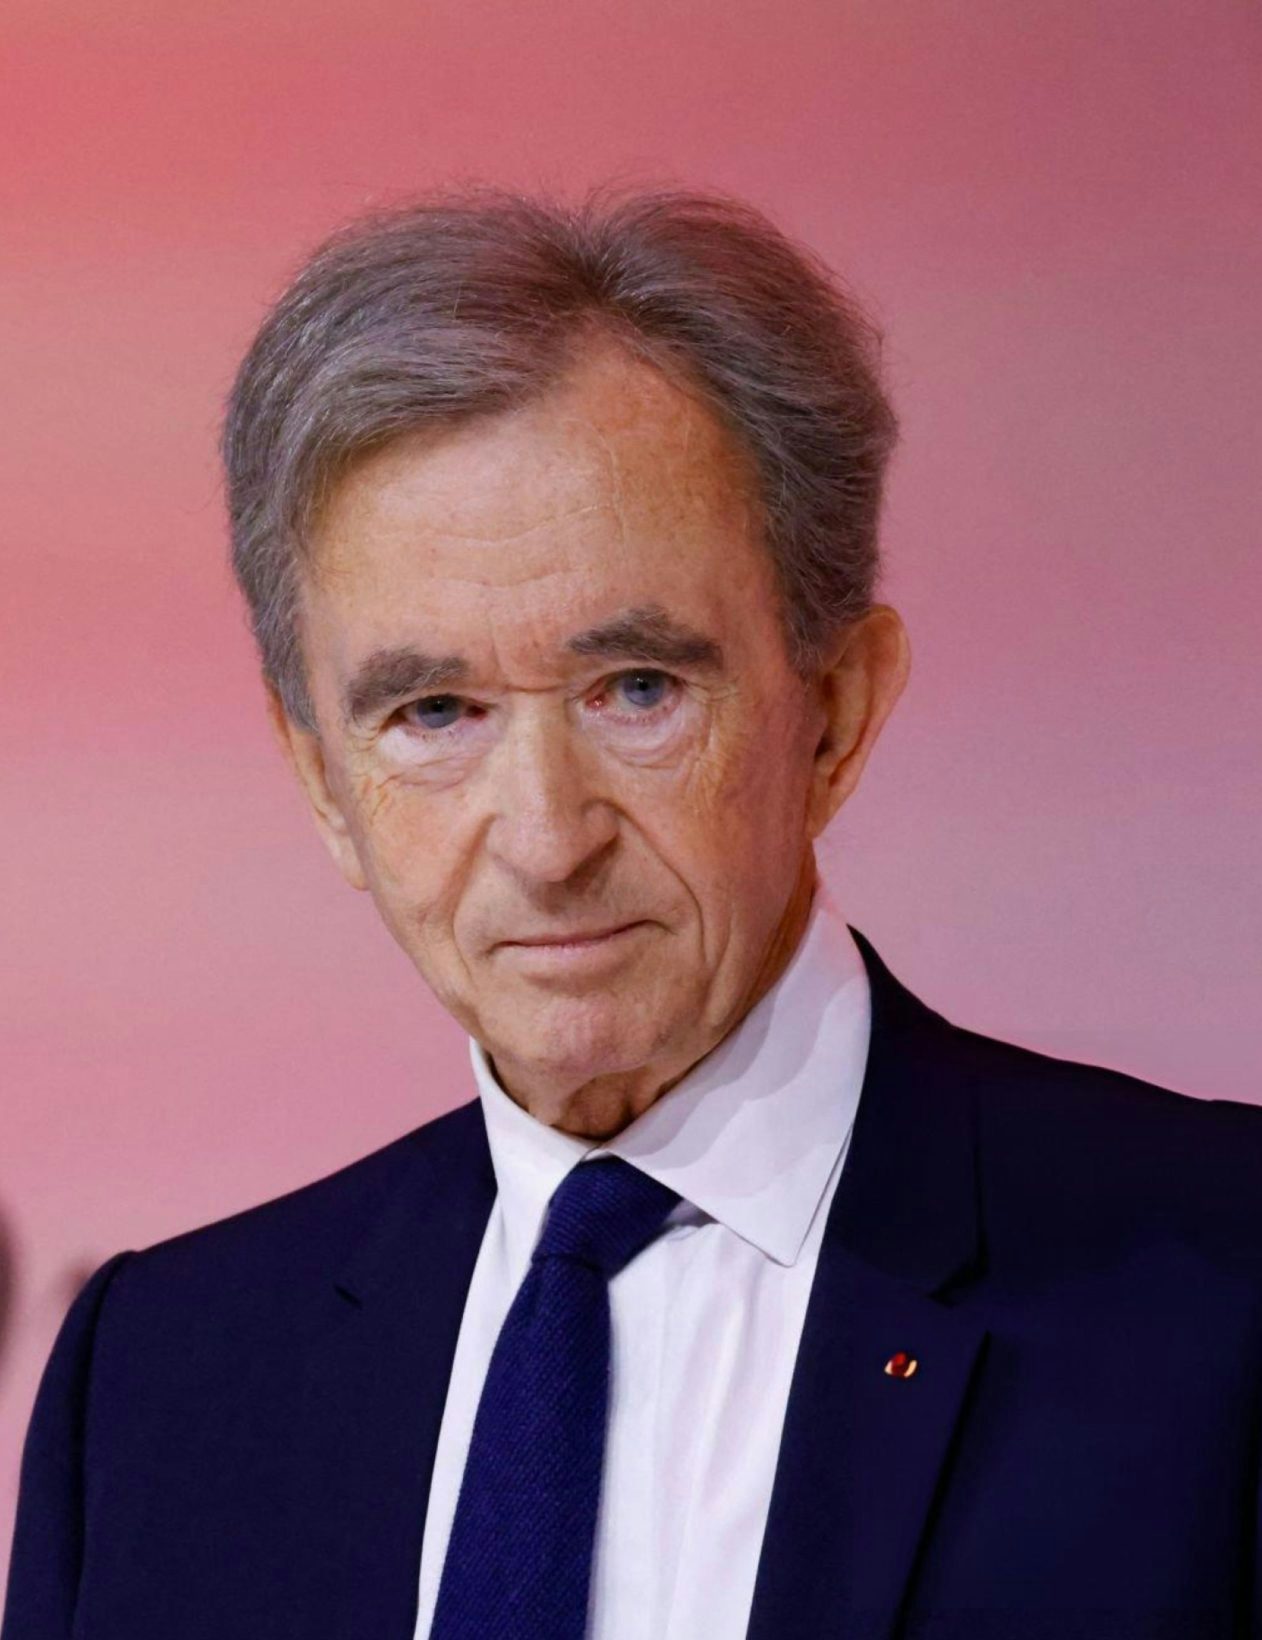 Minor Stake Acquisition by Bernard Arnault in Richemont: Analysis